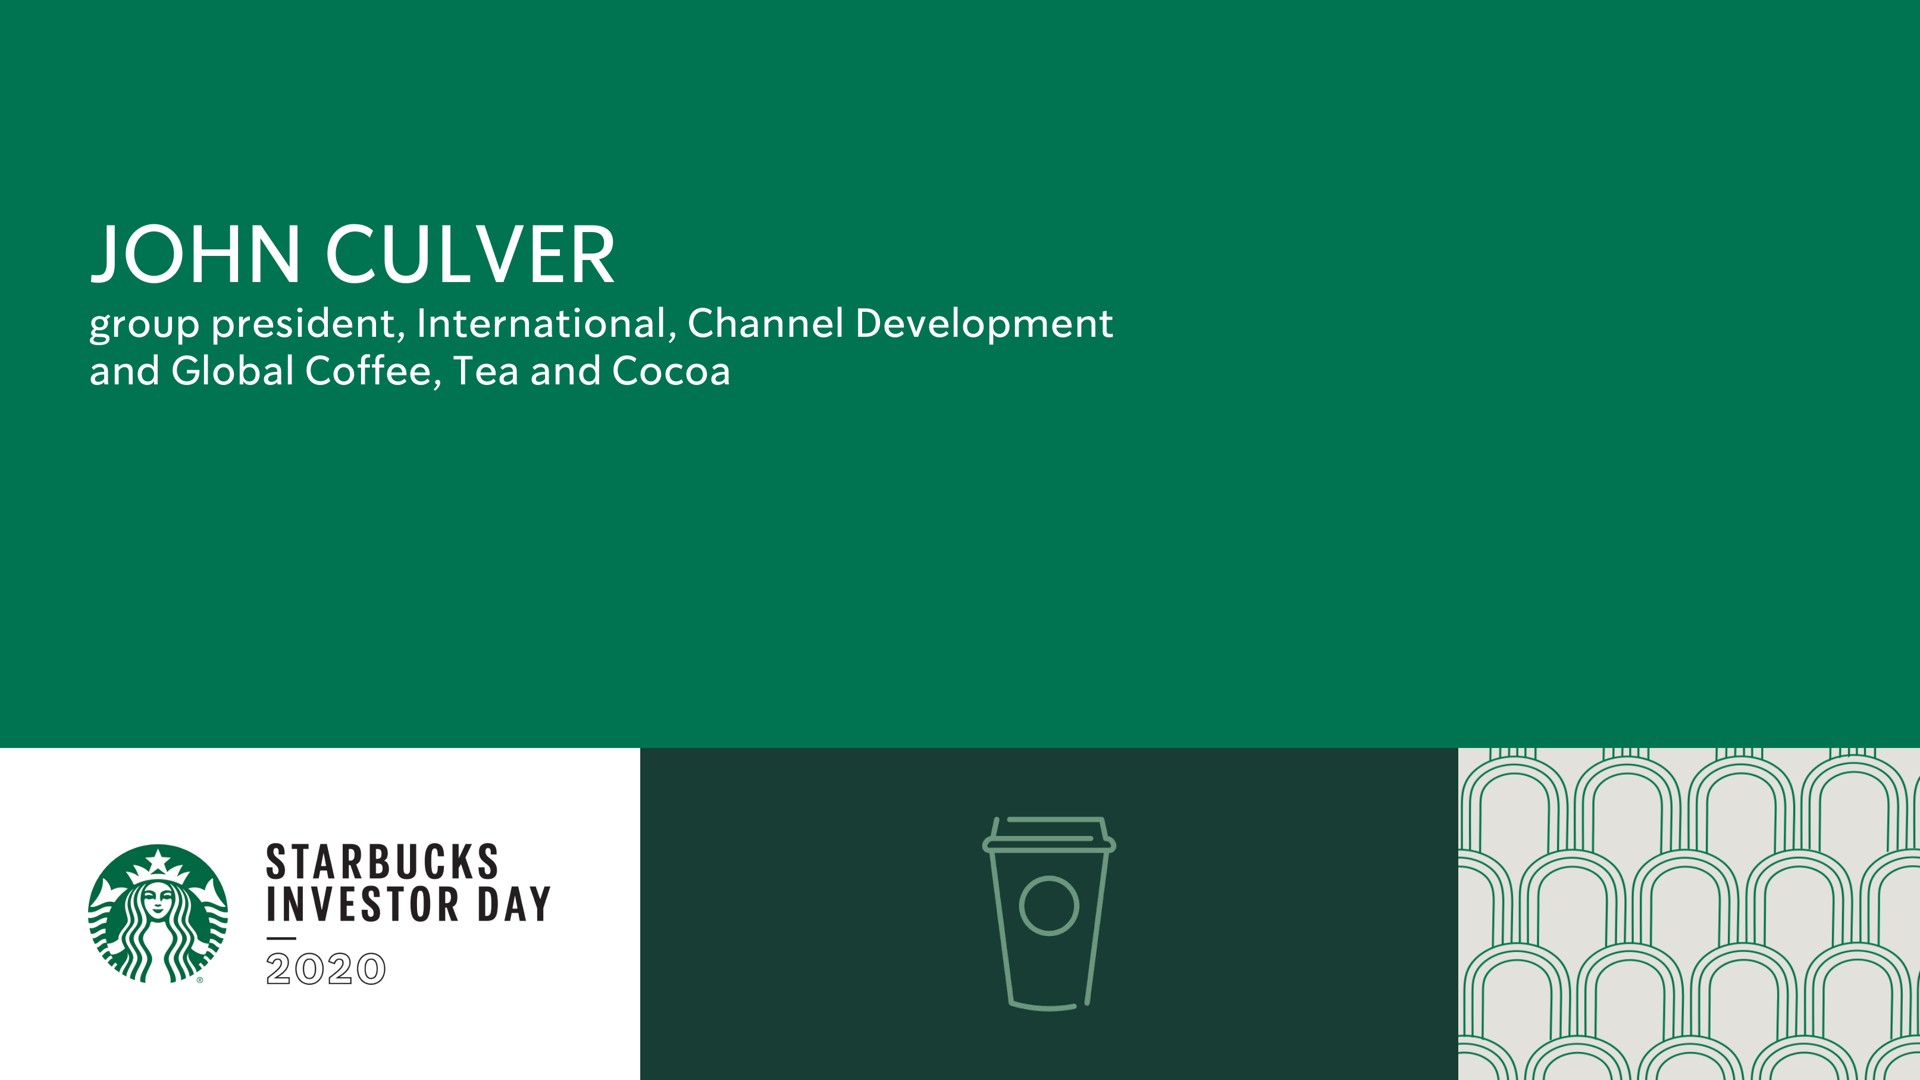 culver group president international channel development and global coffee tea and cocoa eer a day moo | Starbucks